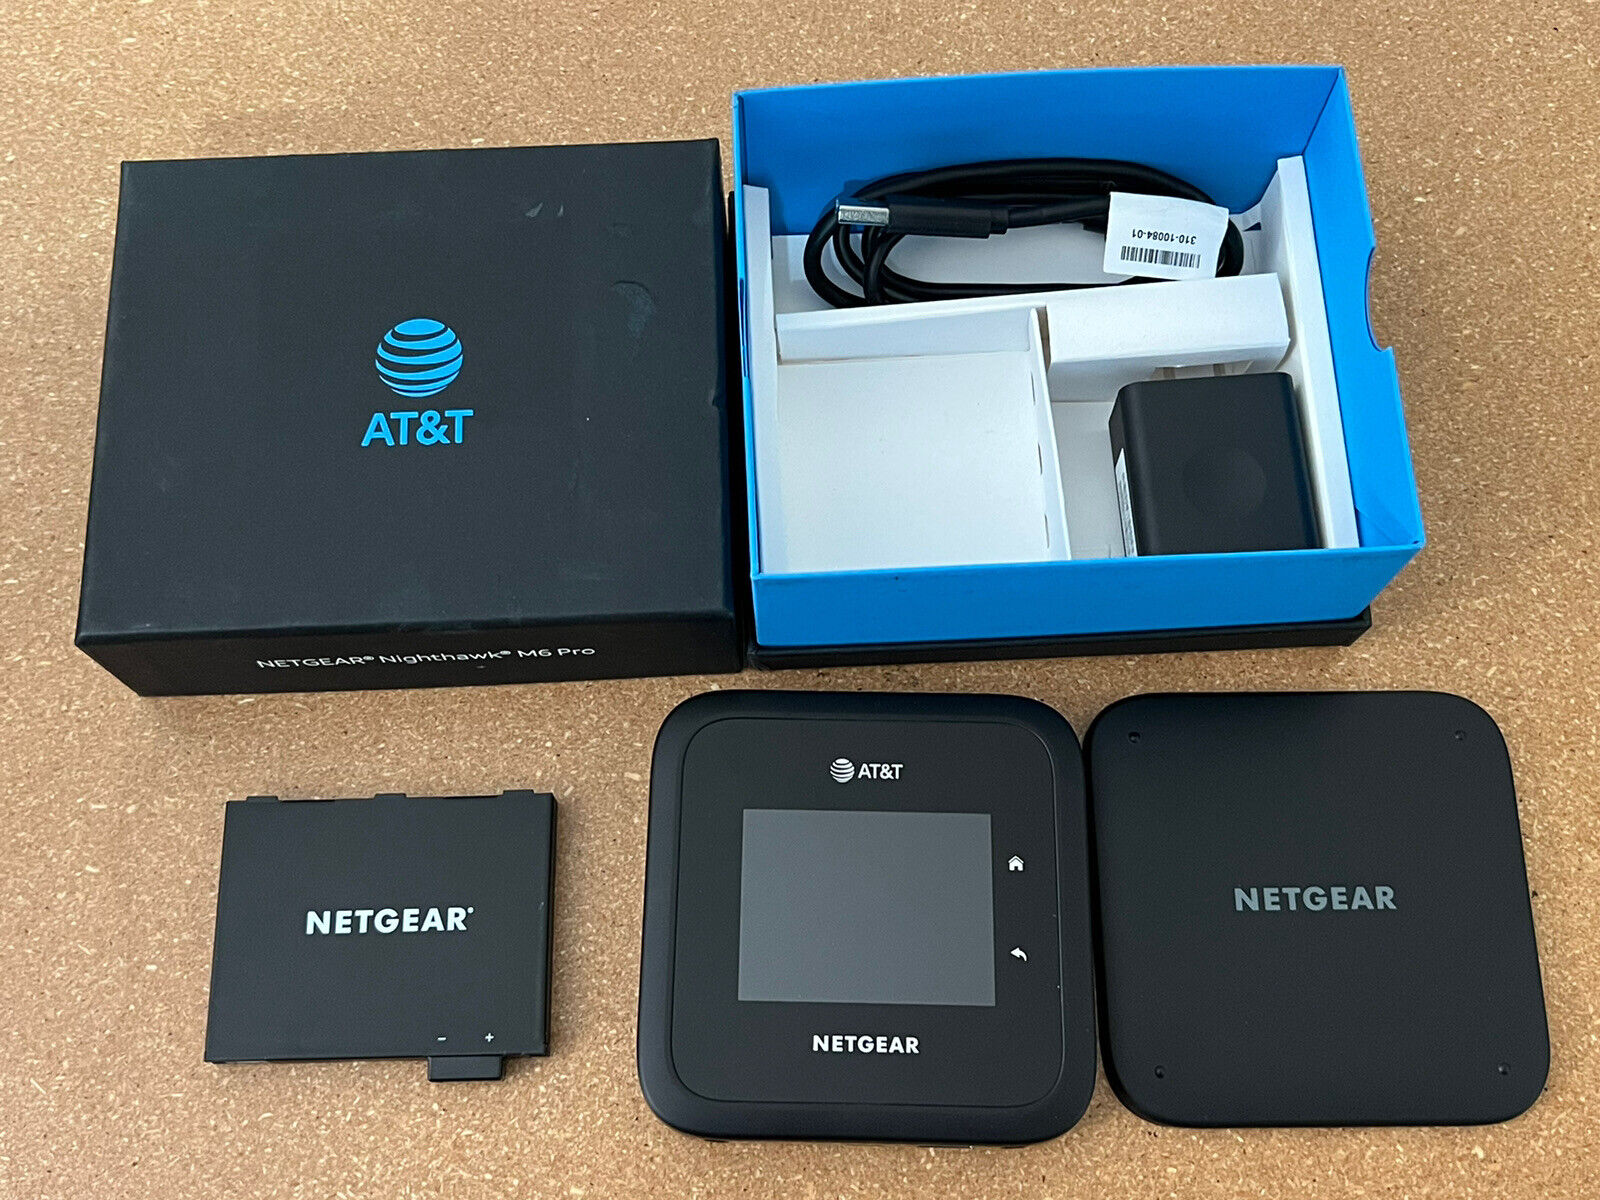 NETGEAR Nighthawk M6 Pro MR6500 AT&T 5G Wi-Fi Router - Black (AT&T only)